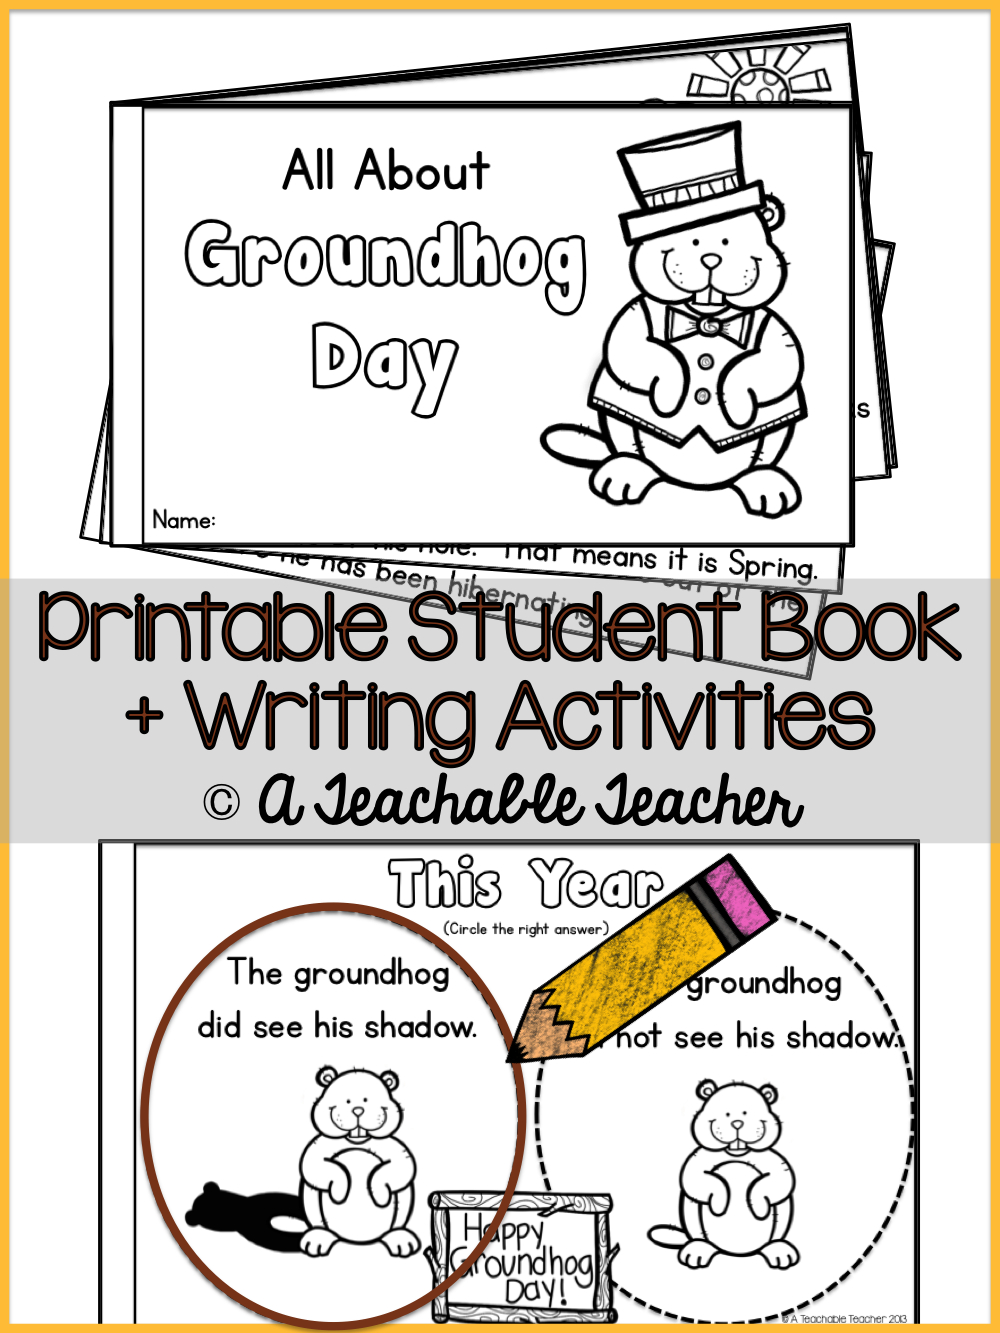 Groundhog Day | Groundhog Day Activities | Best Of Winter: New Year - Free Printable Groundhog Day Booklet